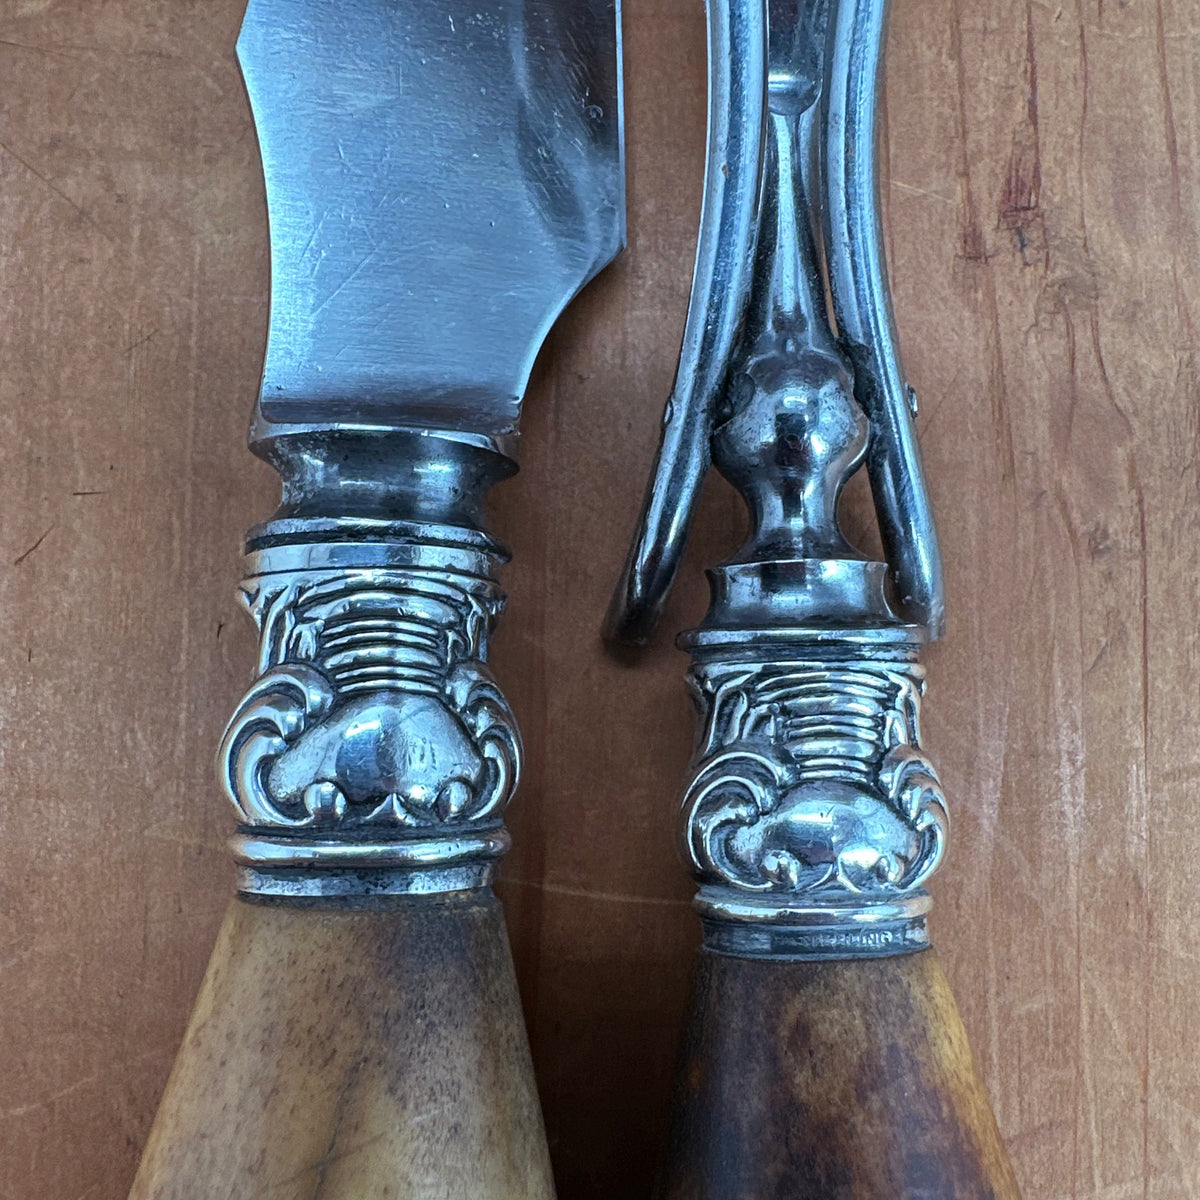 Meriden Cutlery Co Carving Set Stag & Sterling Late 19th Early 20th C?